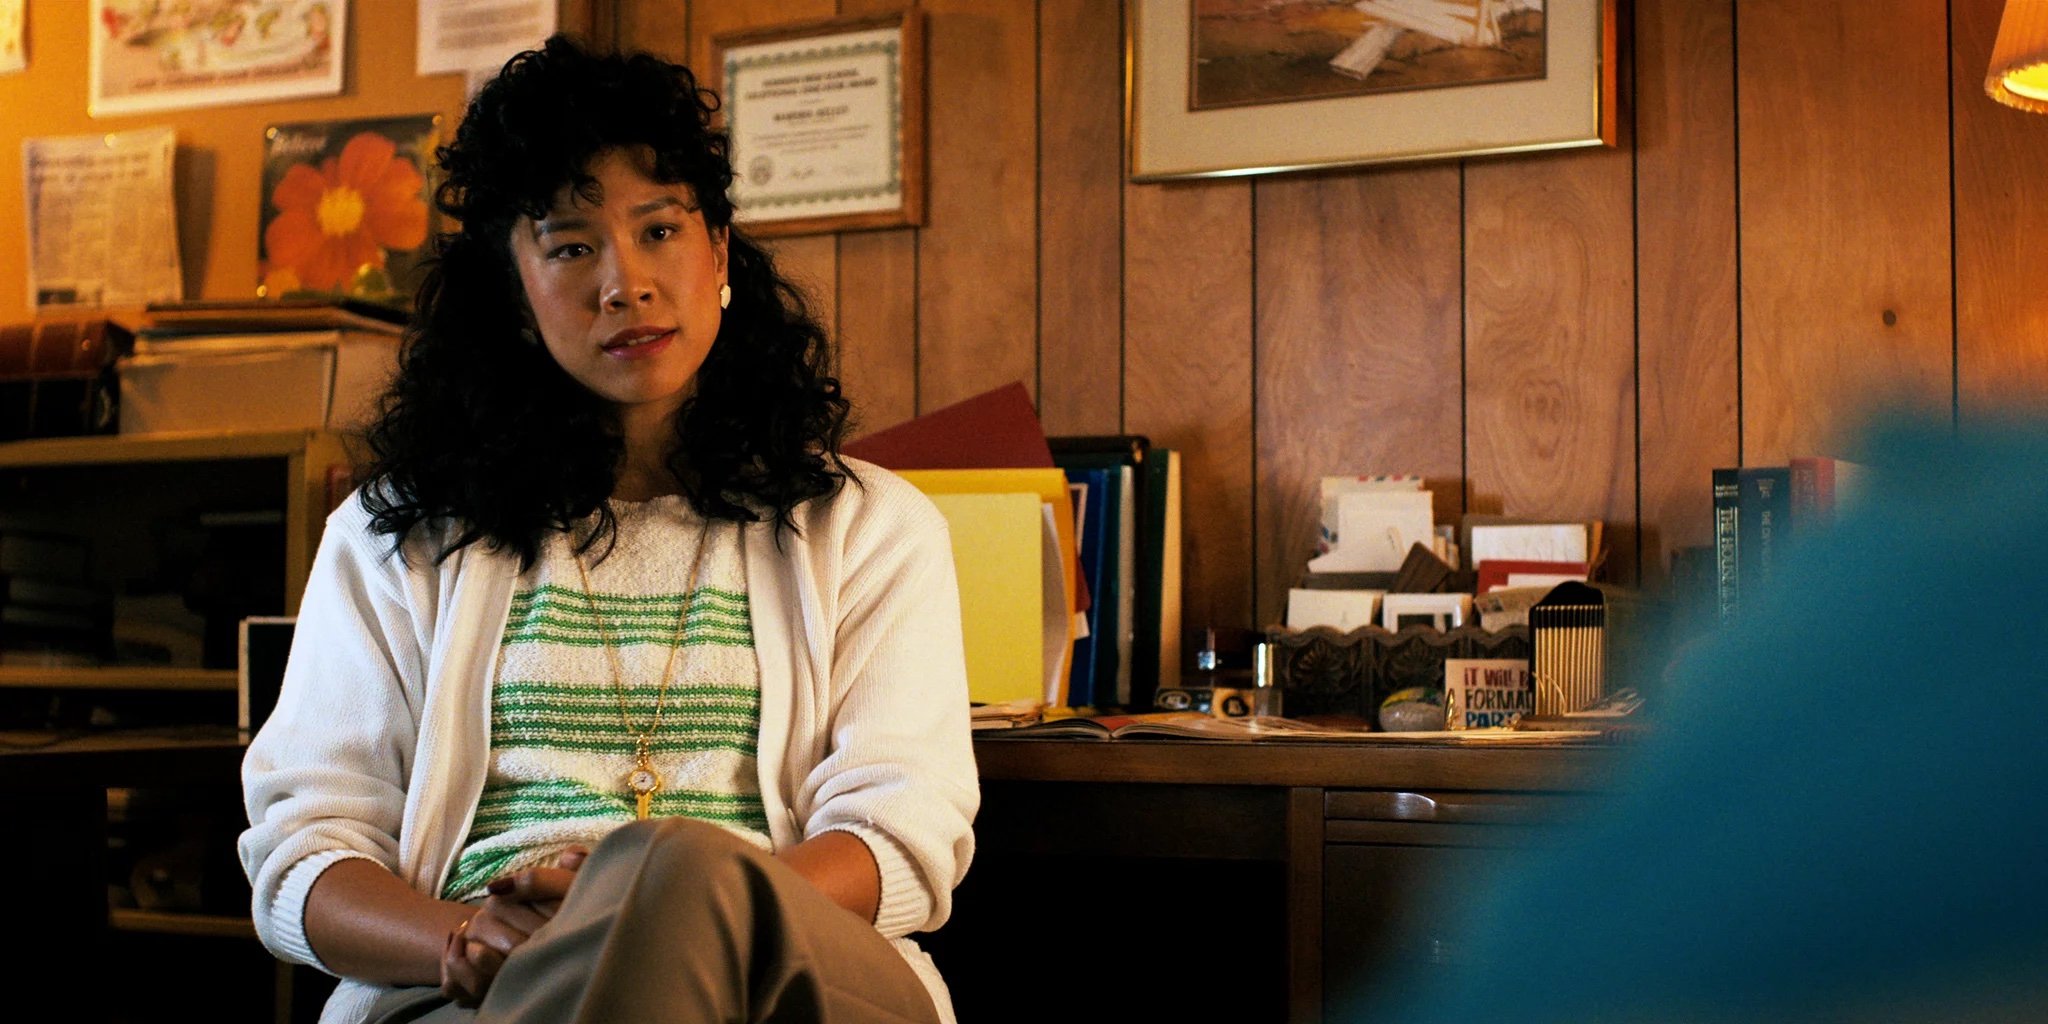 'Stranger Things 4' star Regina Ting Chen as Ms. Kelly wearing a green and white stropped shirt while wearing a clock pendant.